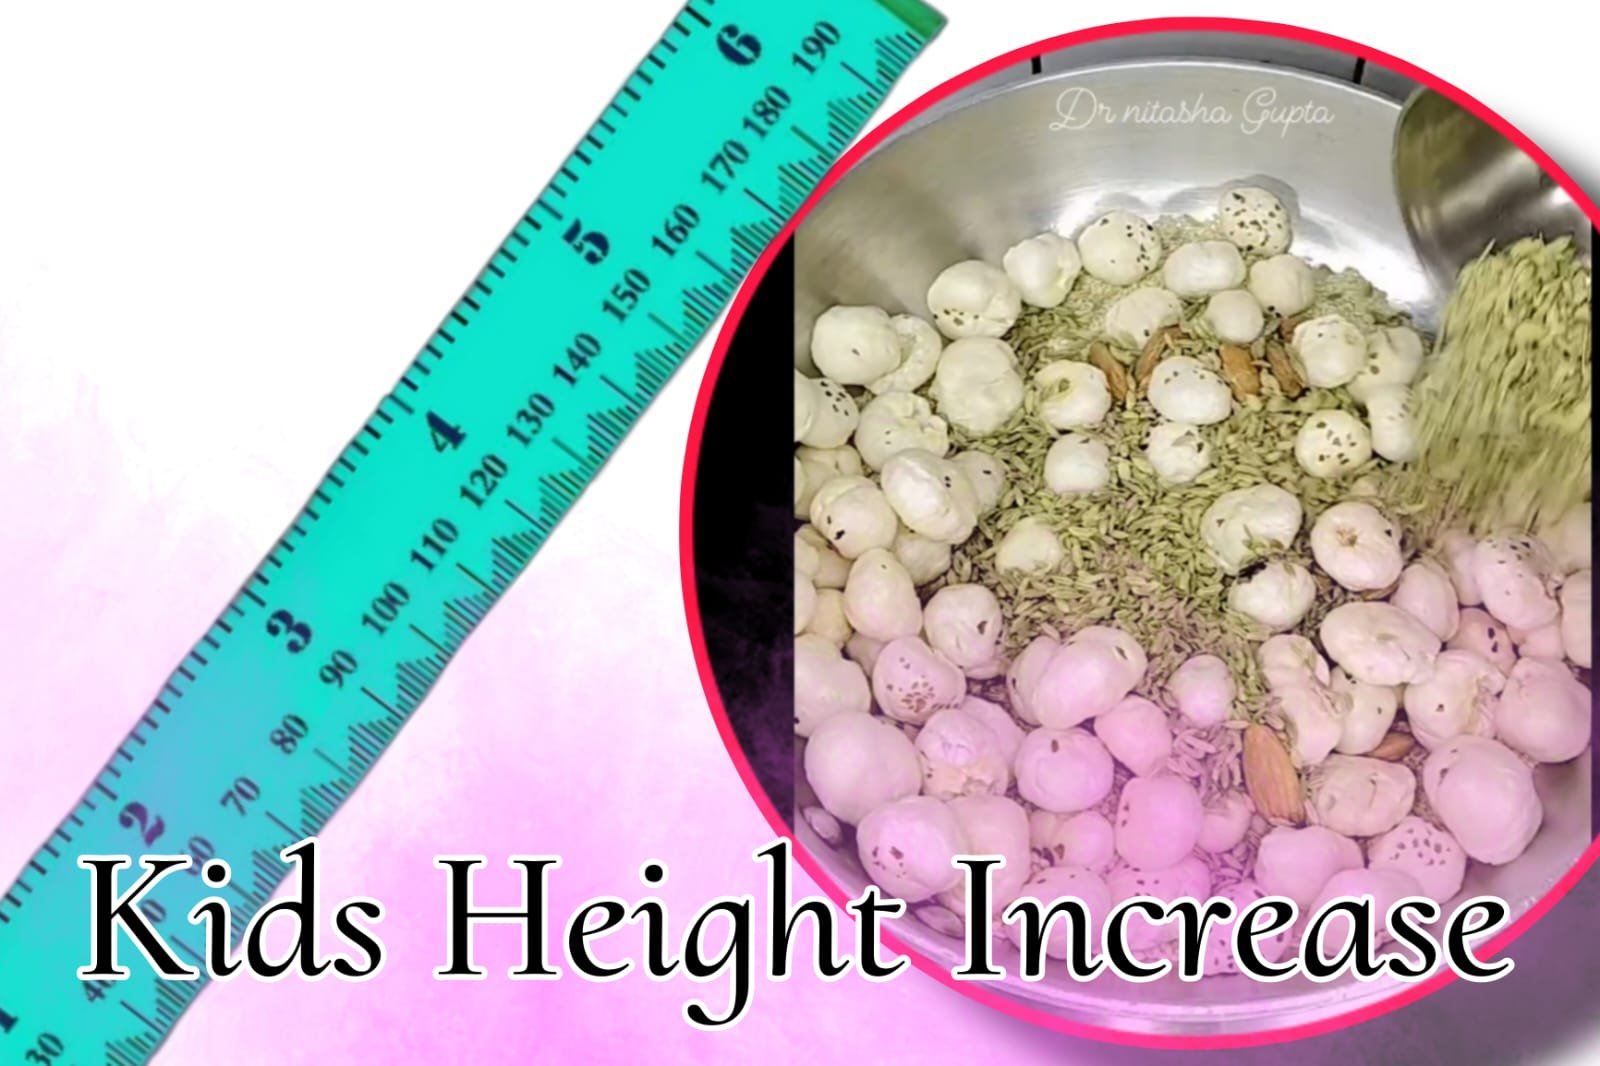 Kids Height Increase - Prepare nutrient rich height increasing powder at home